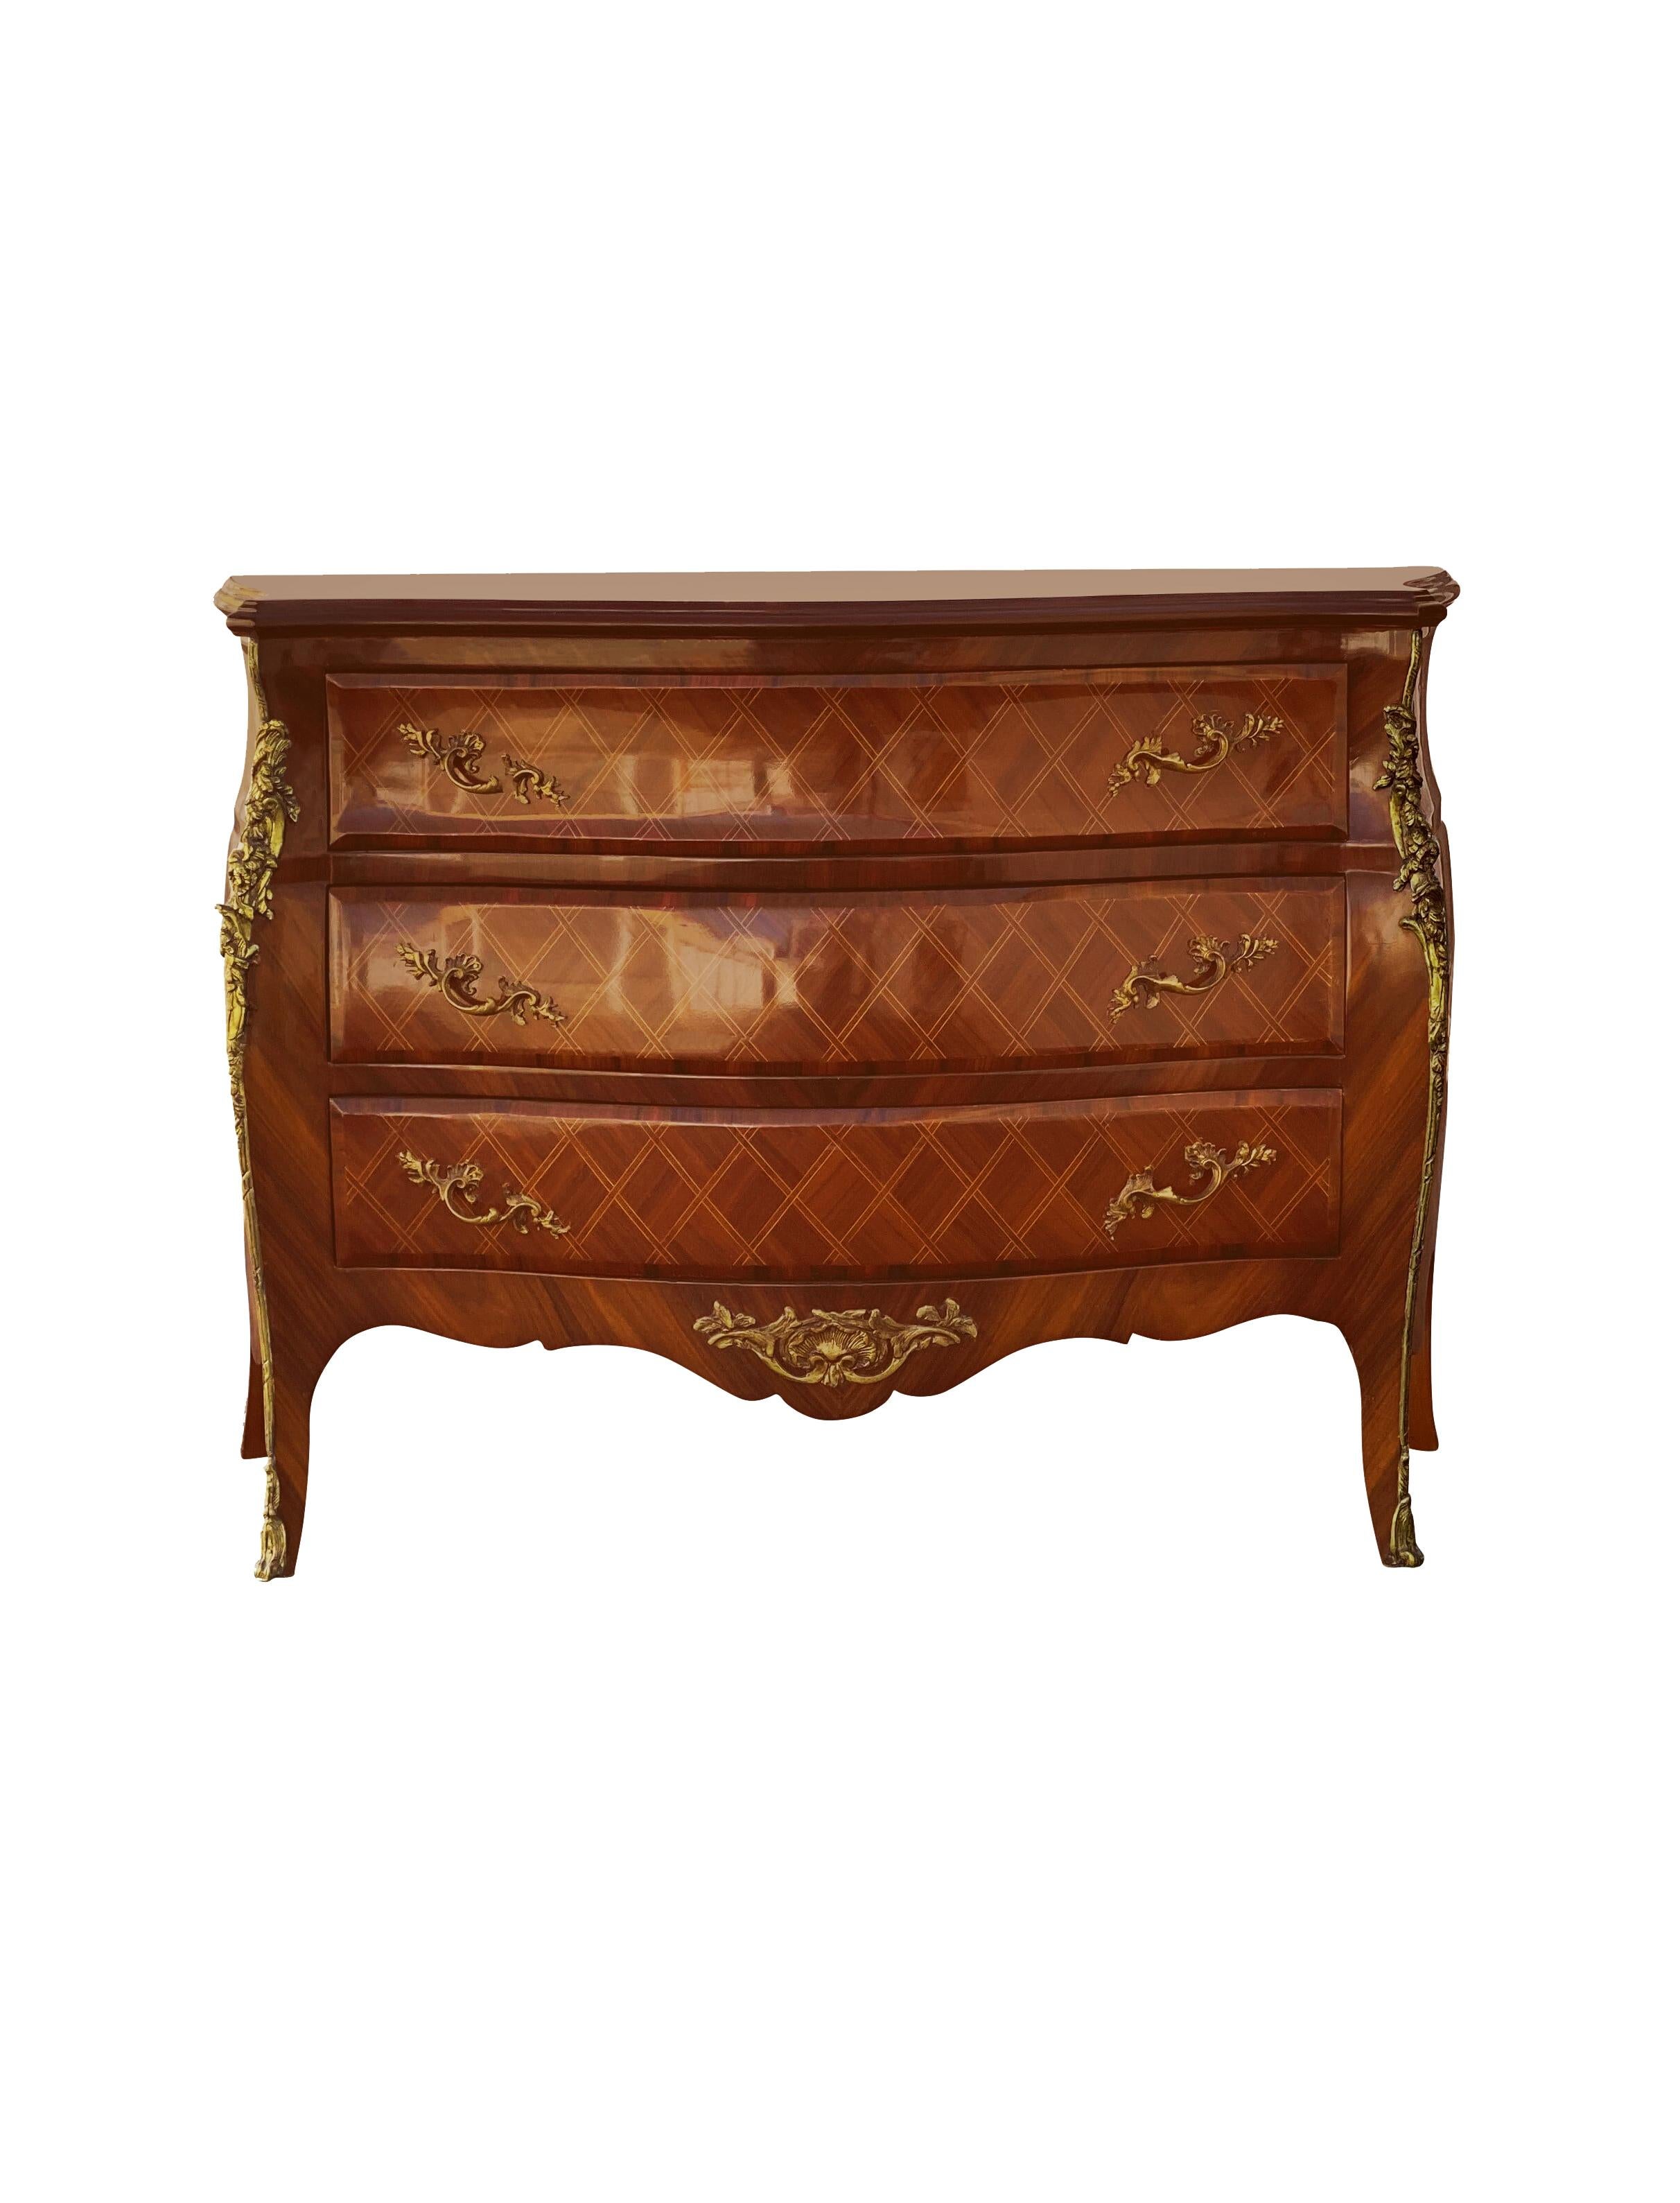 Louis XIV French Louis Antique Inlay and Gilt Bombe Commode Chest For Sale